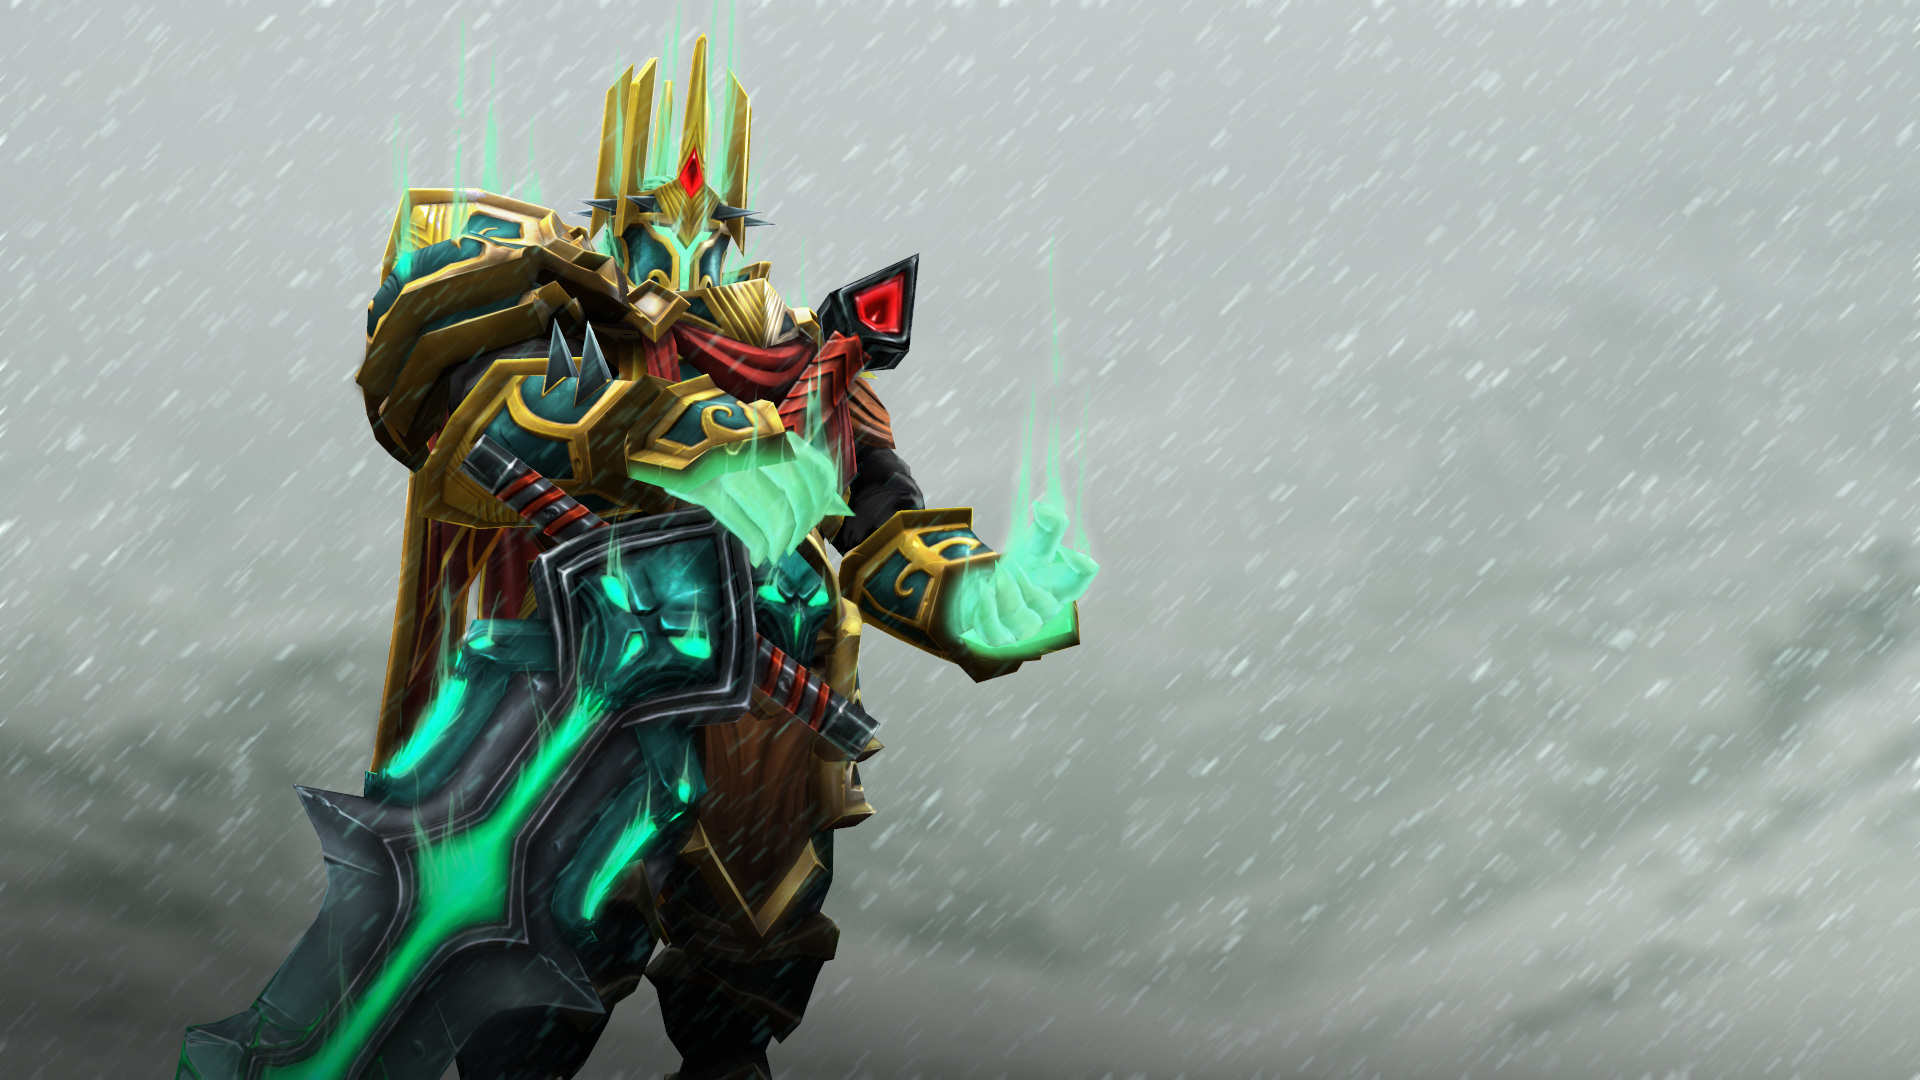 dota 2 wallpaper for iphone,fictional character,games,pc game,warlord,action figure